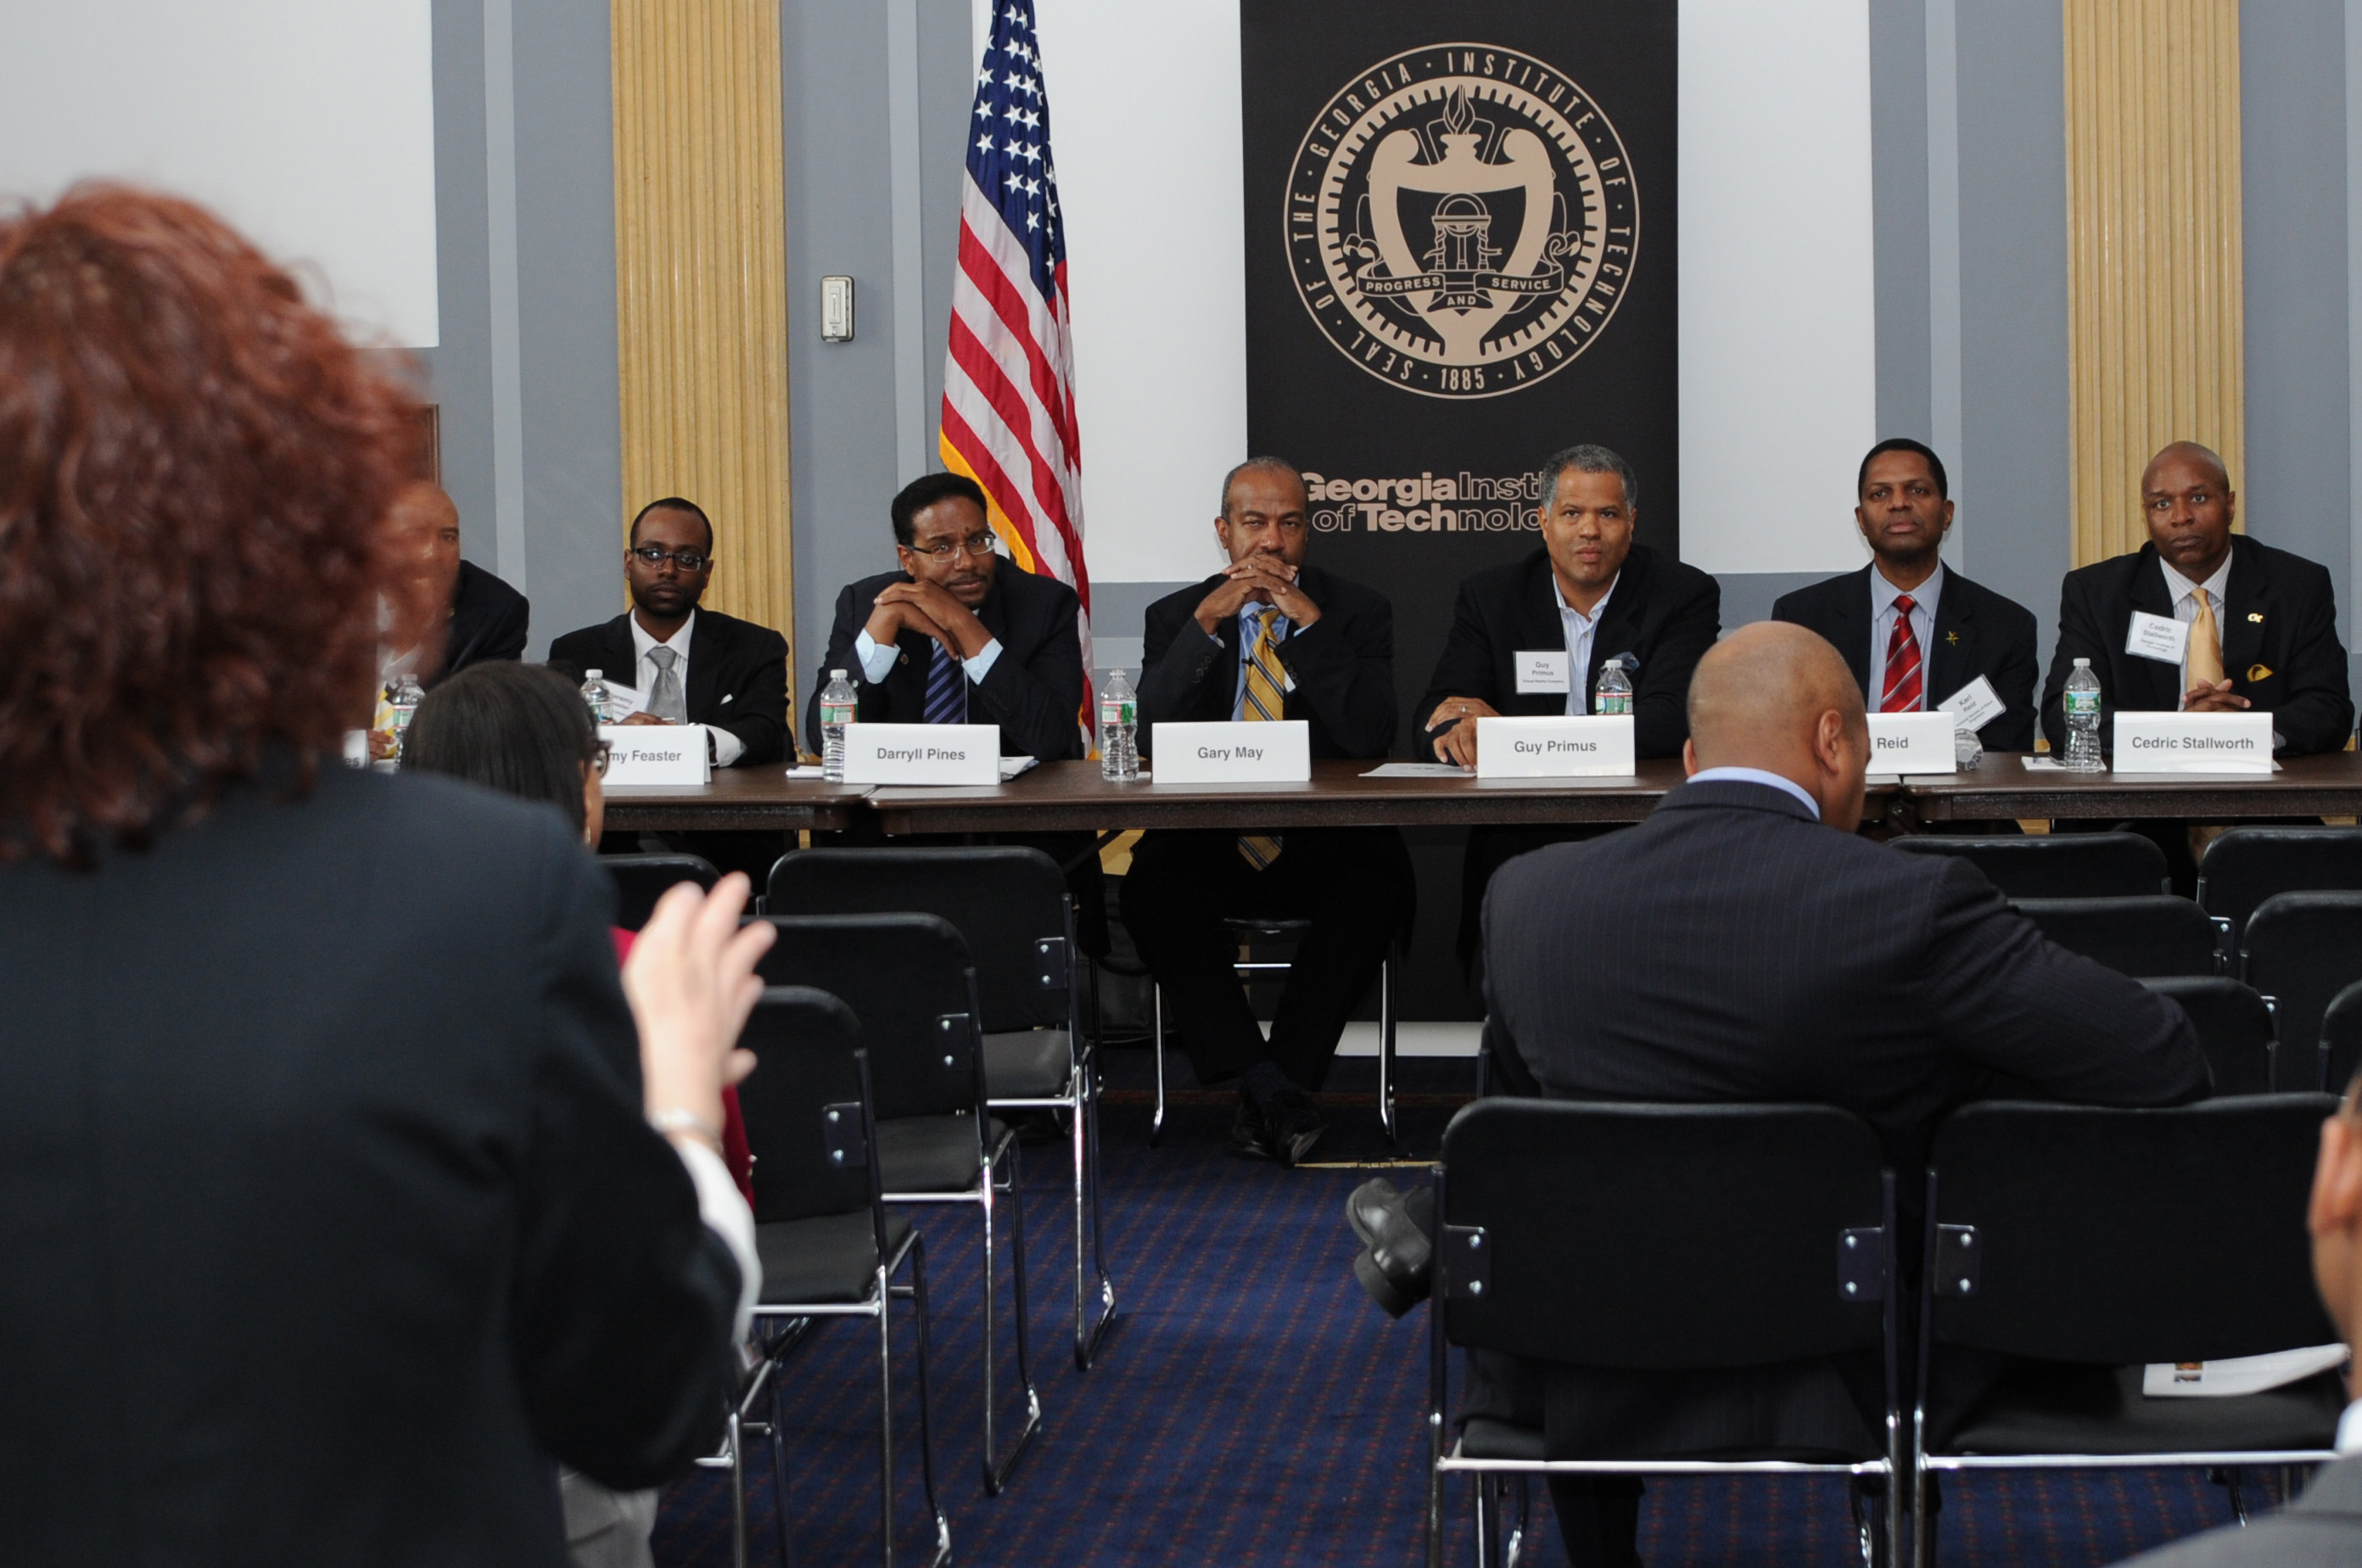 National event held in Washington, D.C., examined how to attract more African-American men to STEM and how to support those already working in these careers.